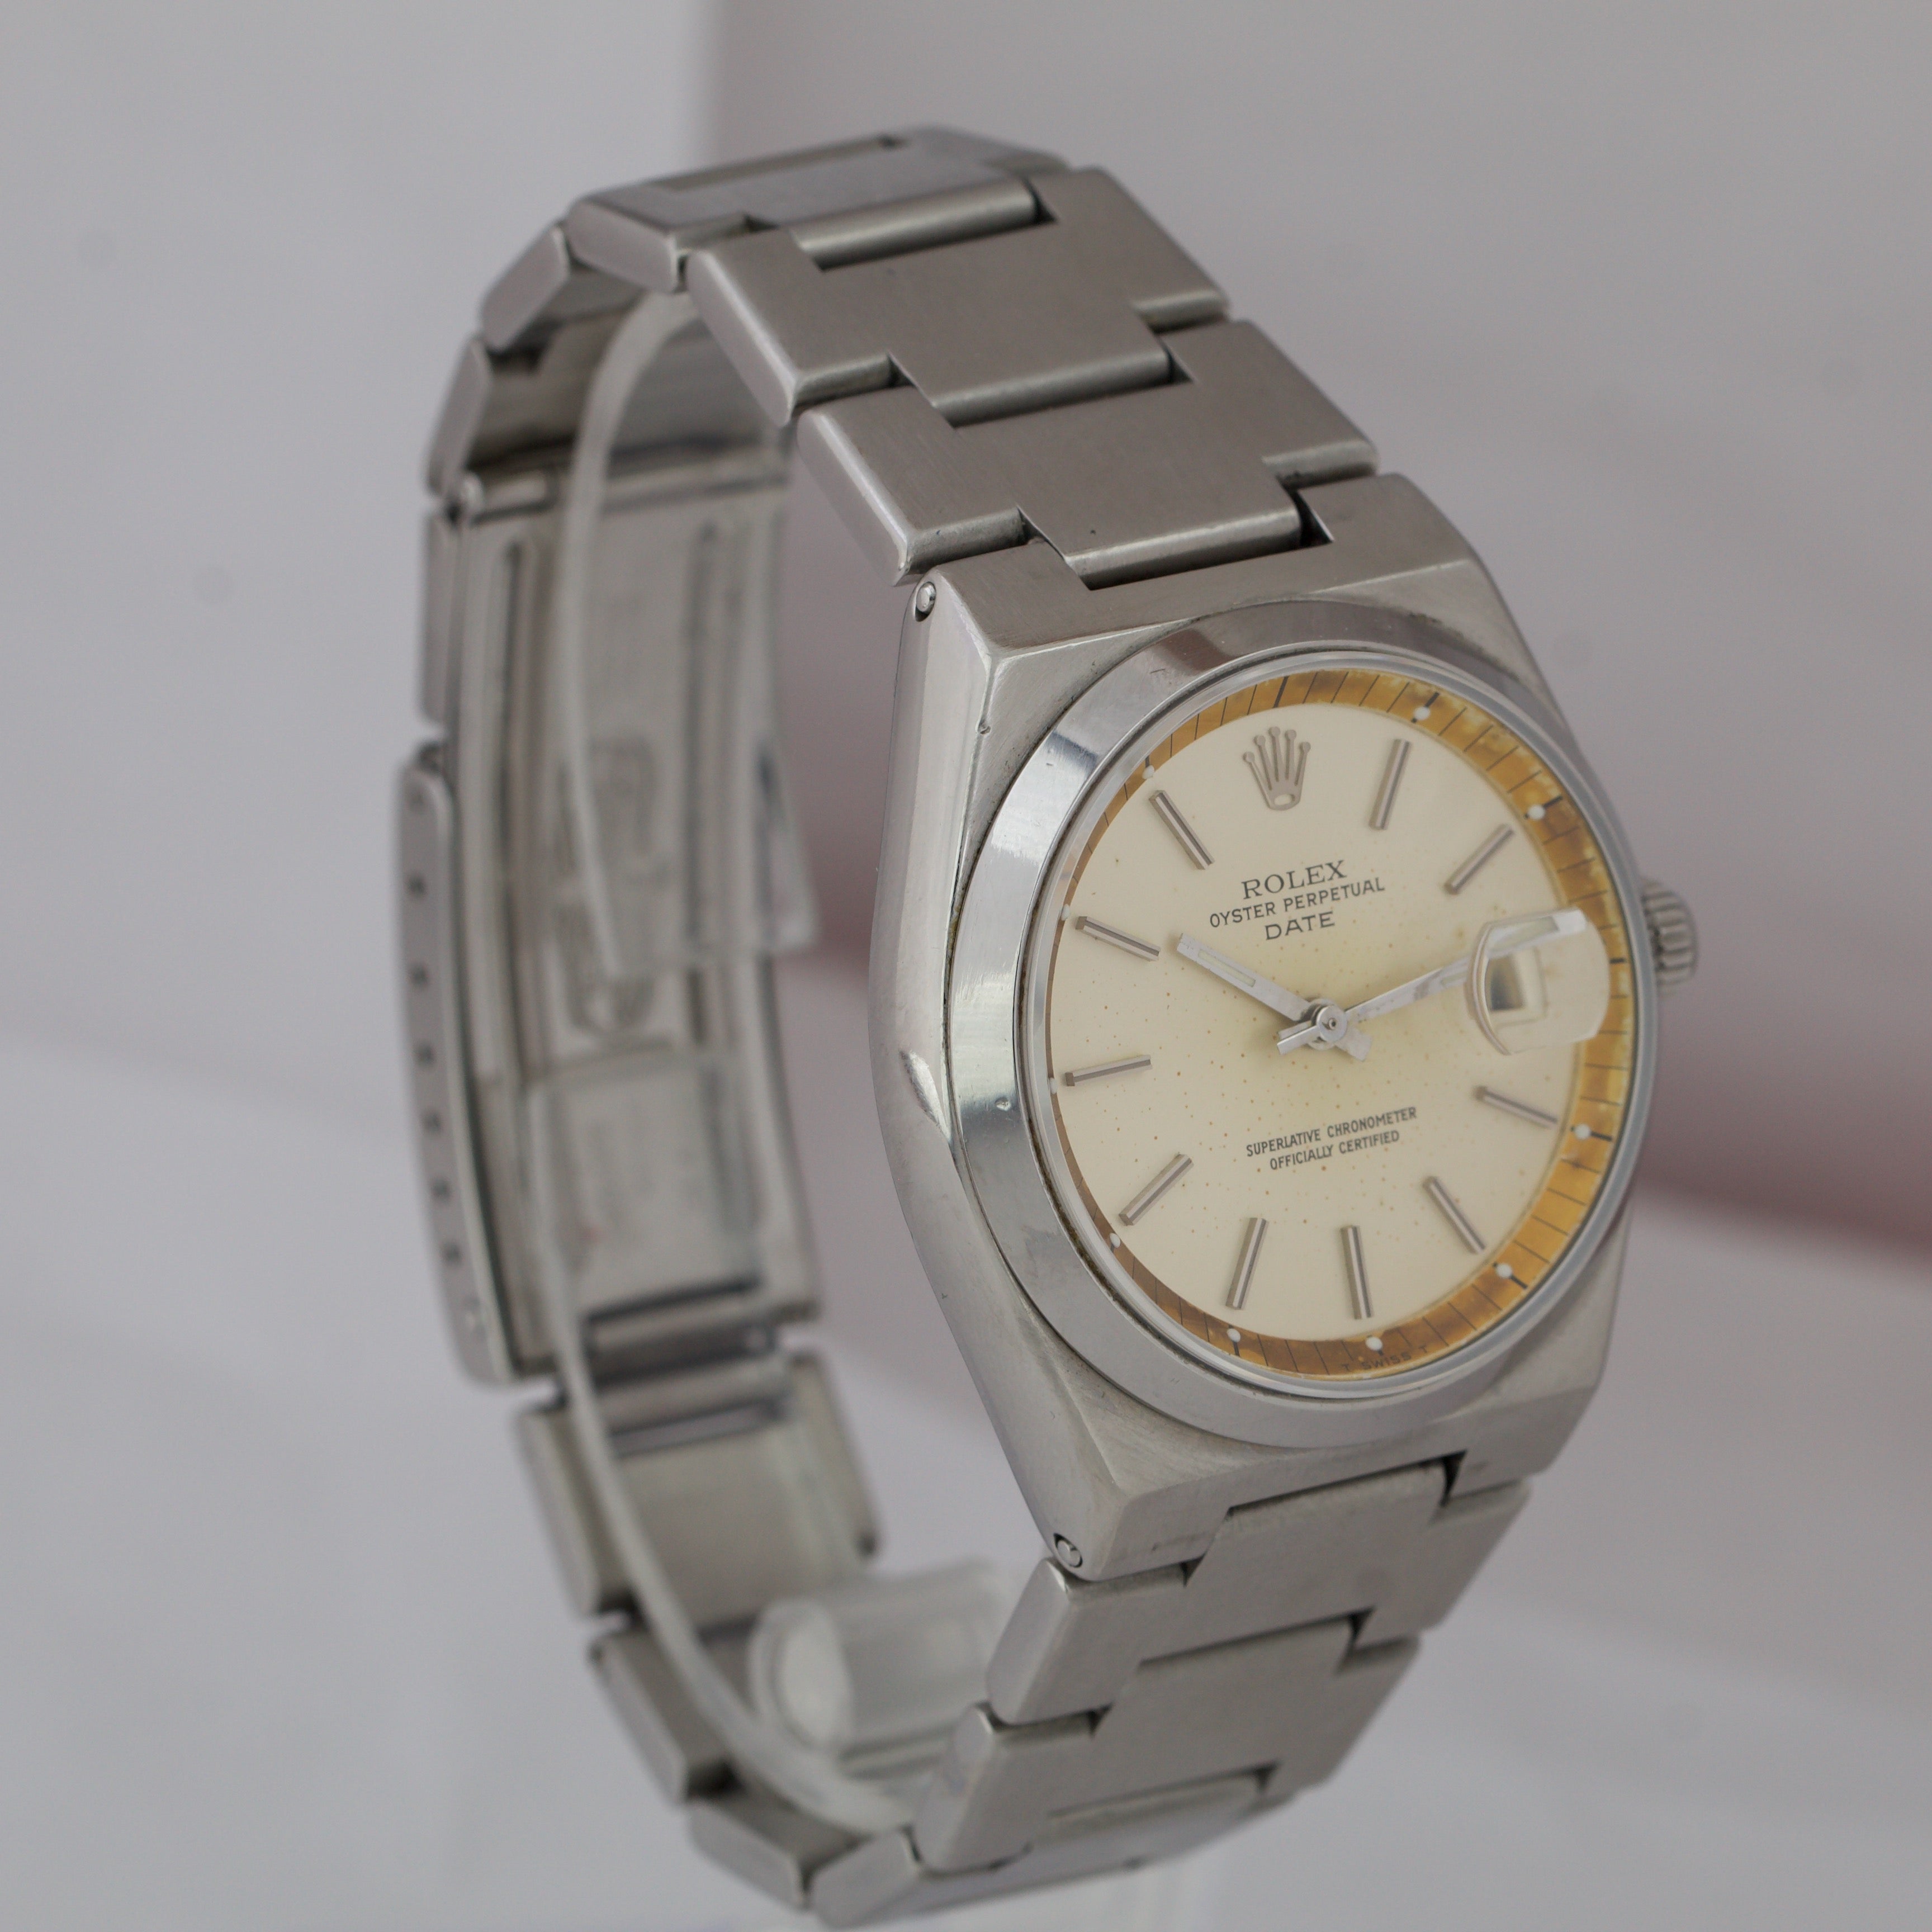 RARE 1977 Rolex Oyster Perpetual Date Stainless 36mm Silver Patina Watch 1530